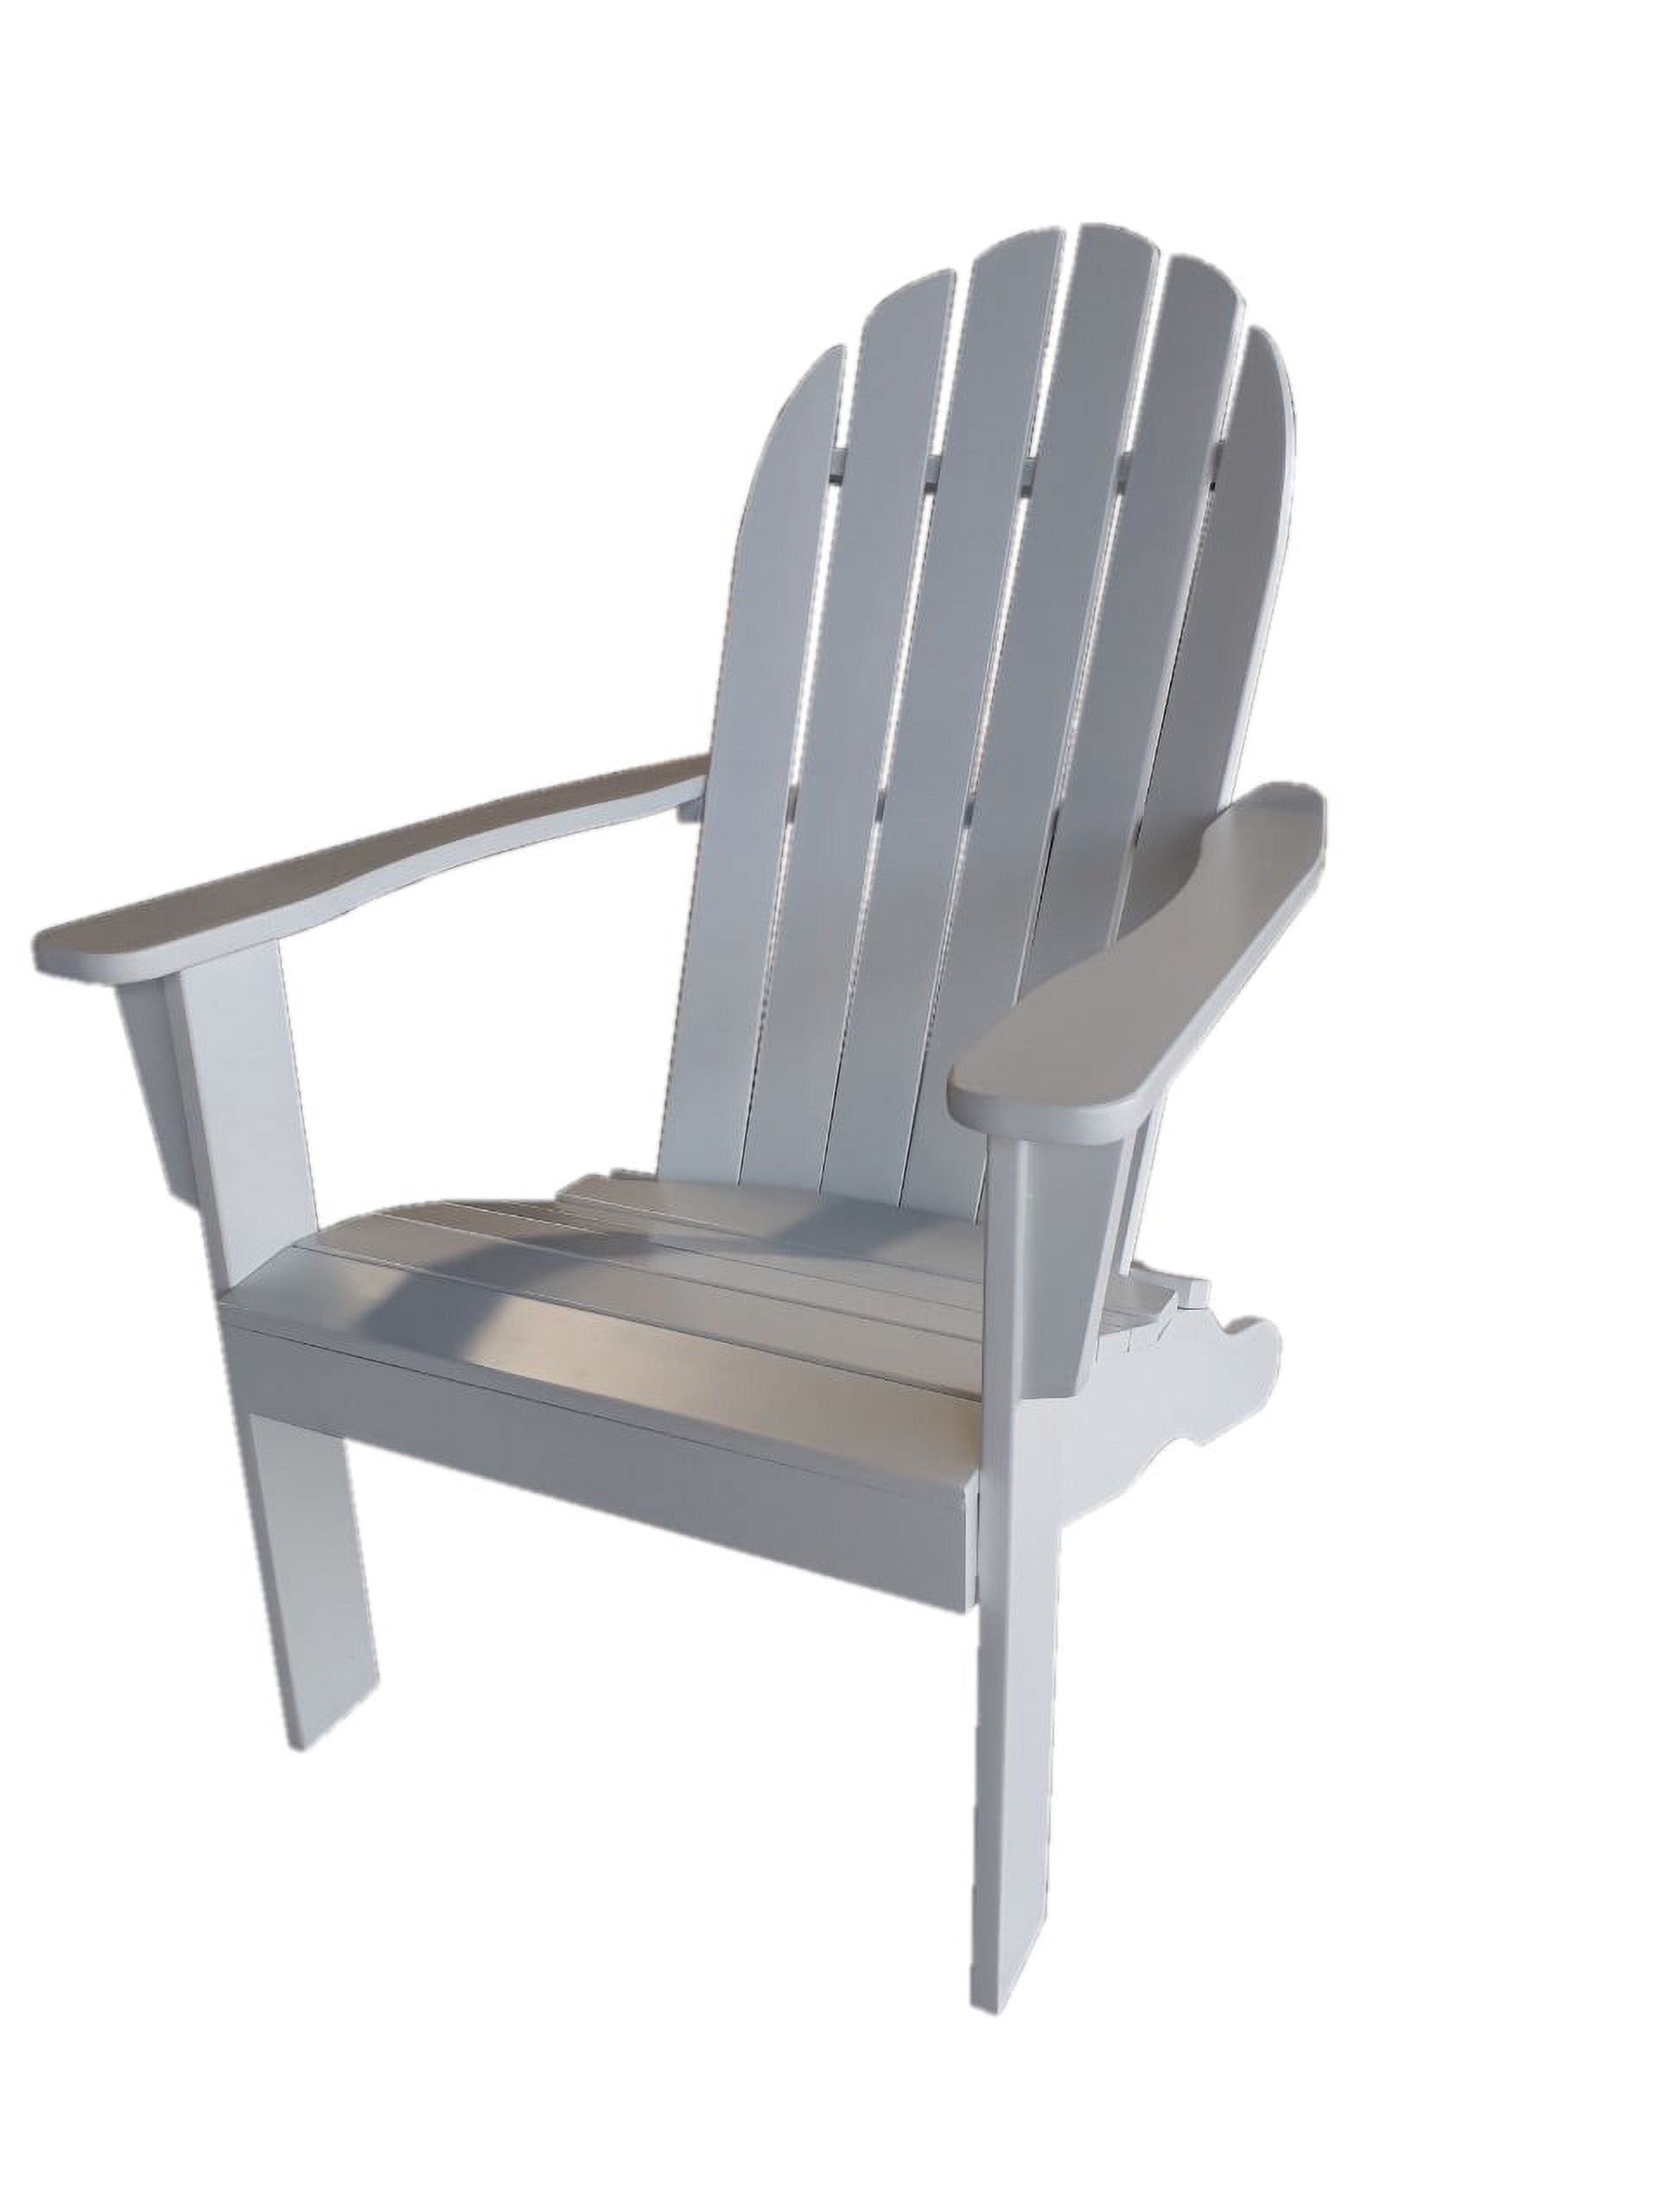 Mainstays Wood Outdoor Adirondack Chair, White Color - image 4 of 8